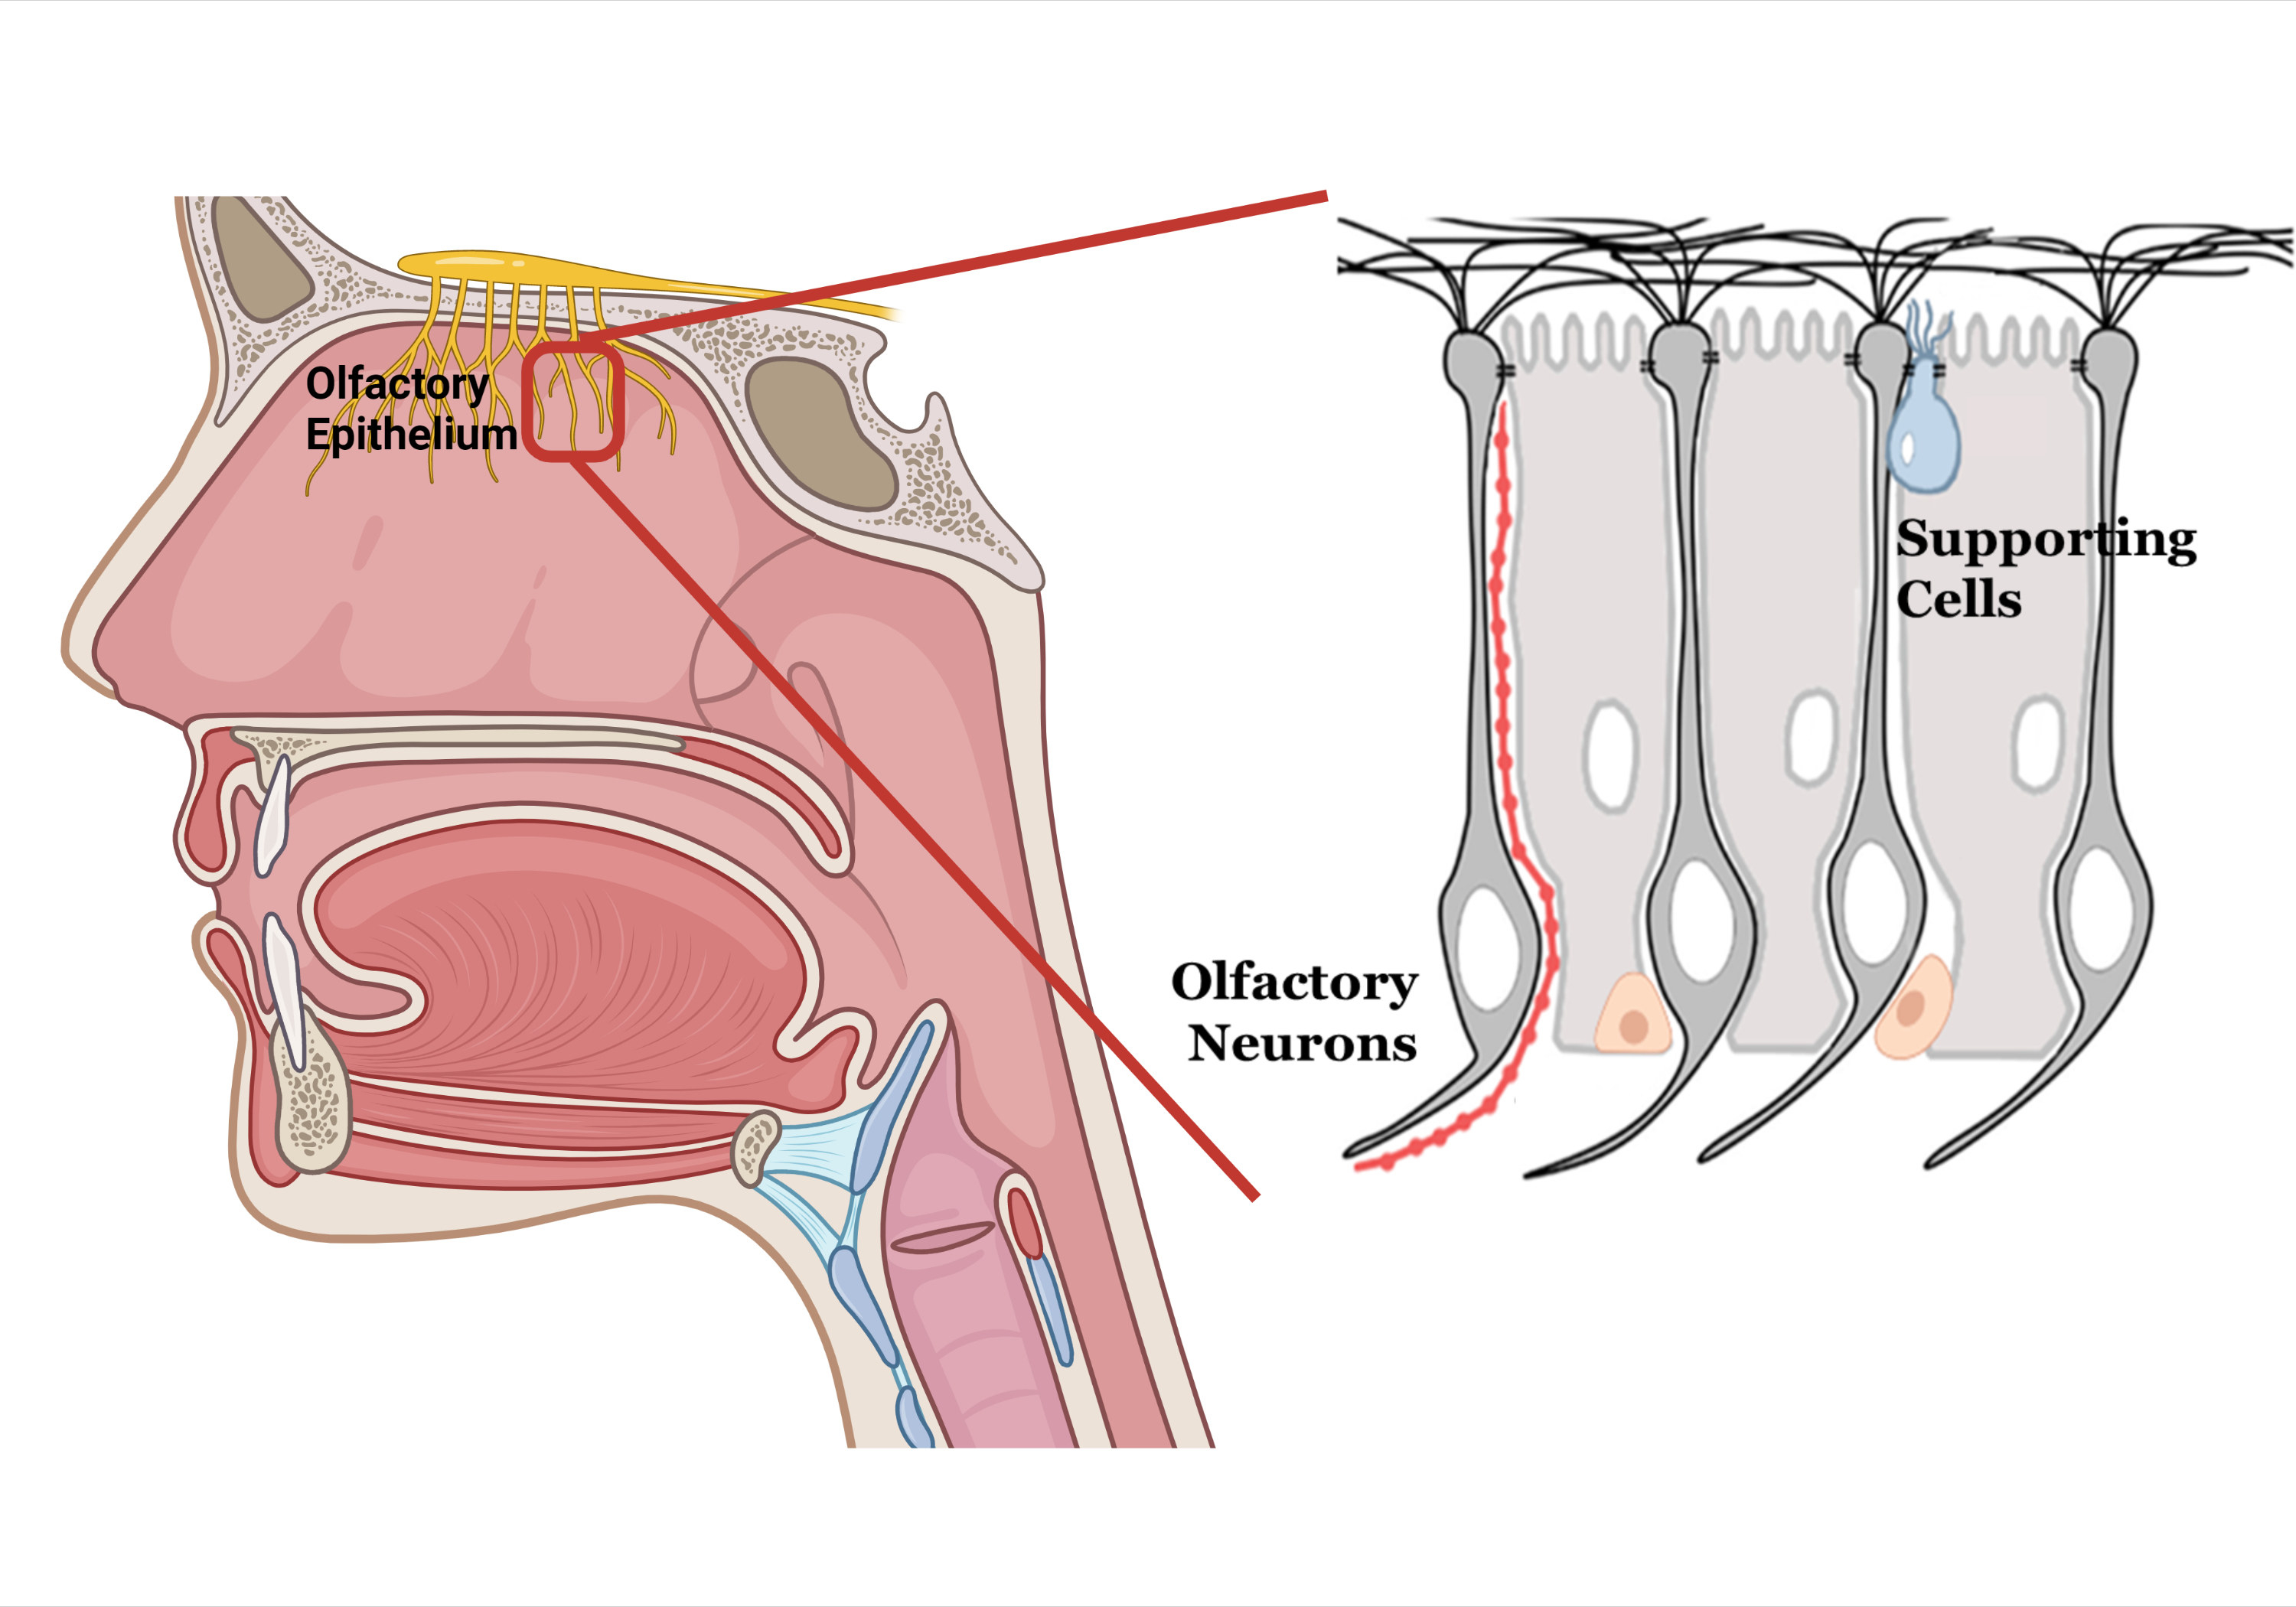 Diagram of the olfactory epithelium, with olfactory neurons and supporting cells, inside the head in the back of the nose